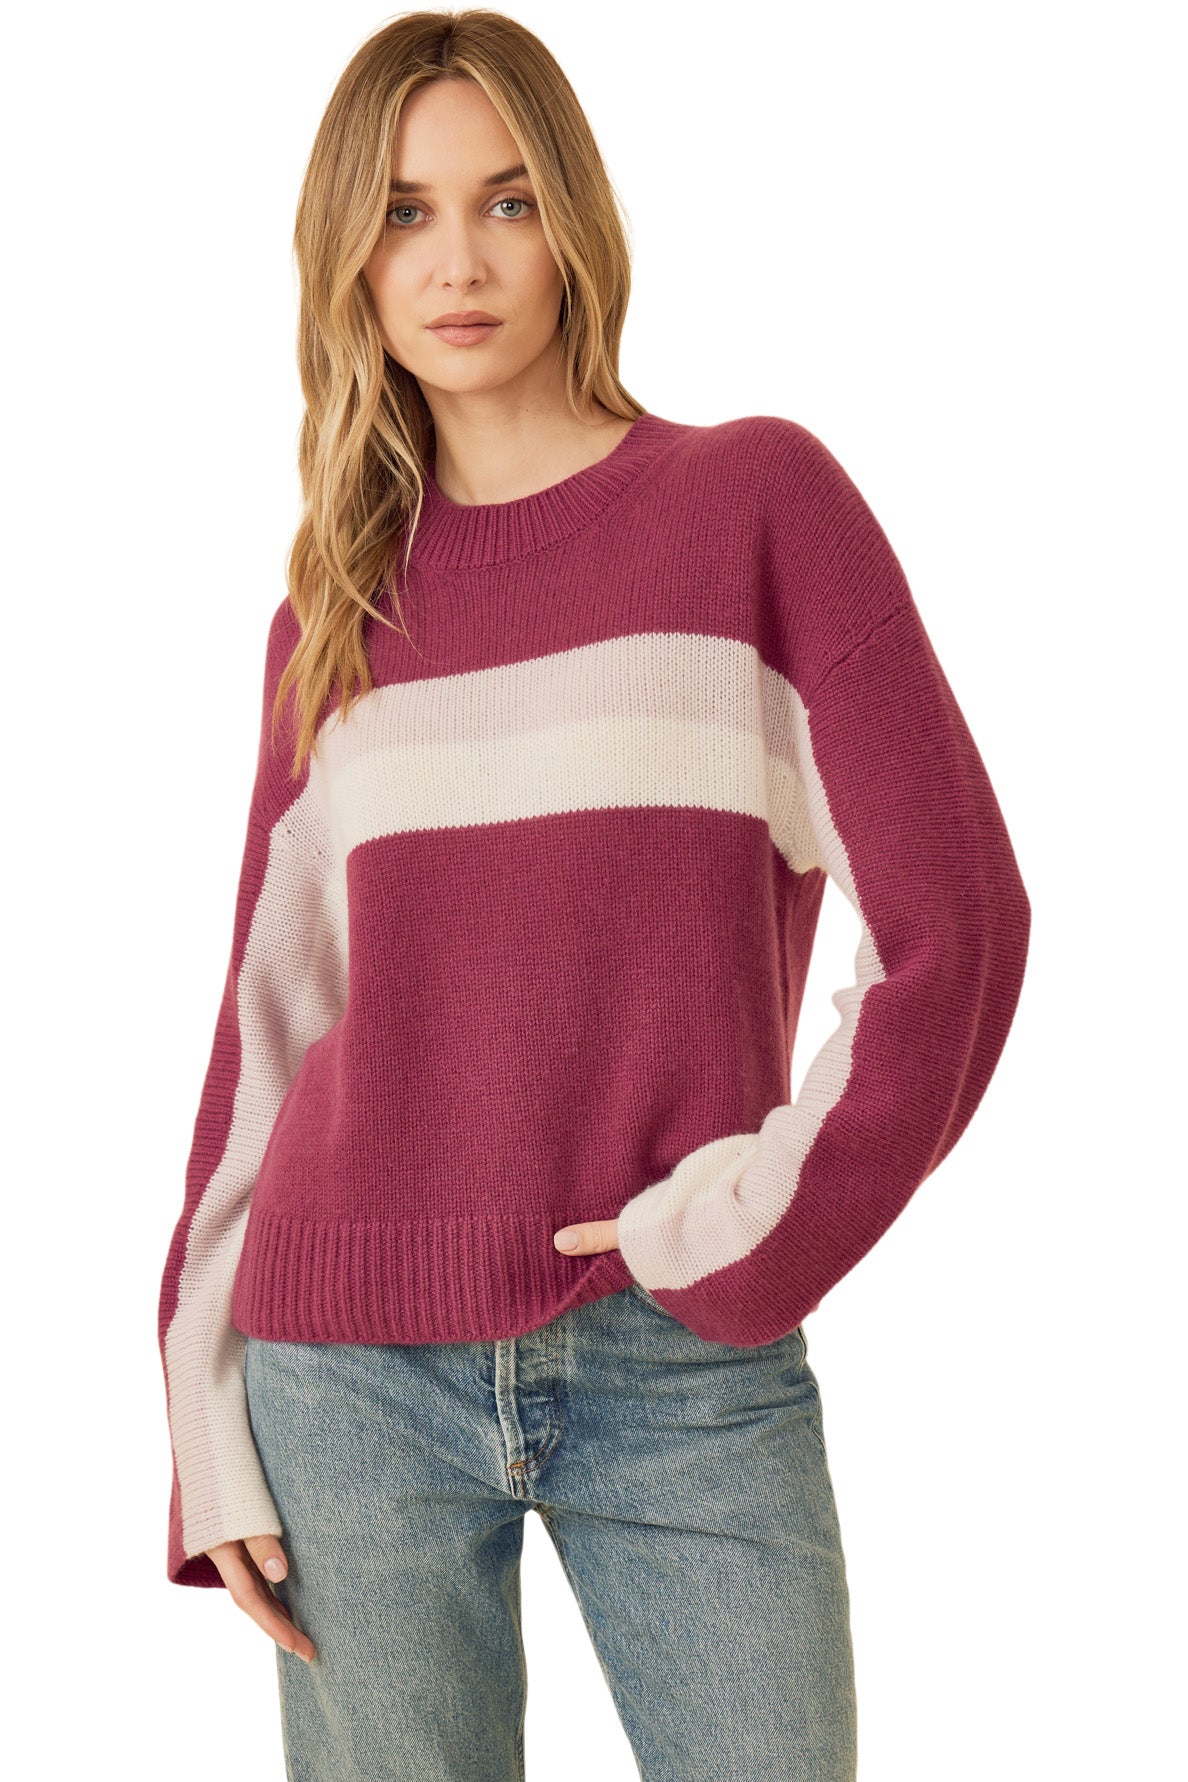 One Grey Day Adonis Cashmere Pullover in Mulberry Combo